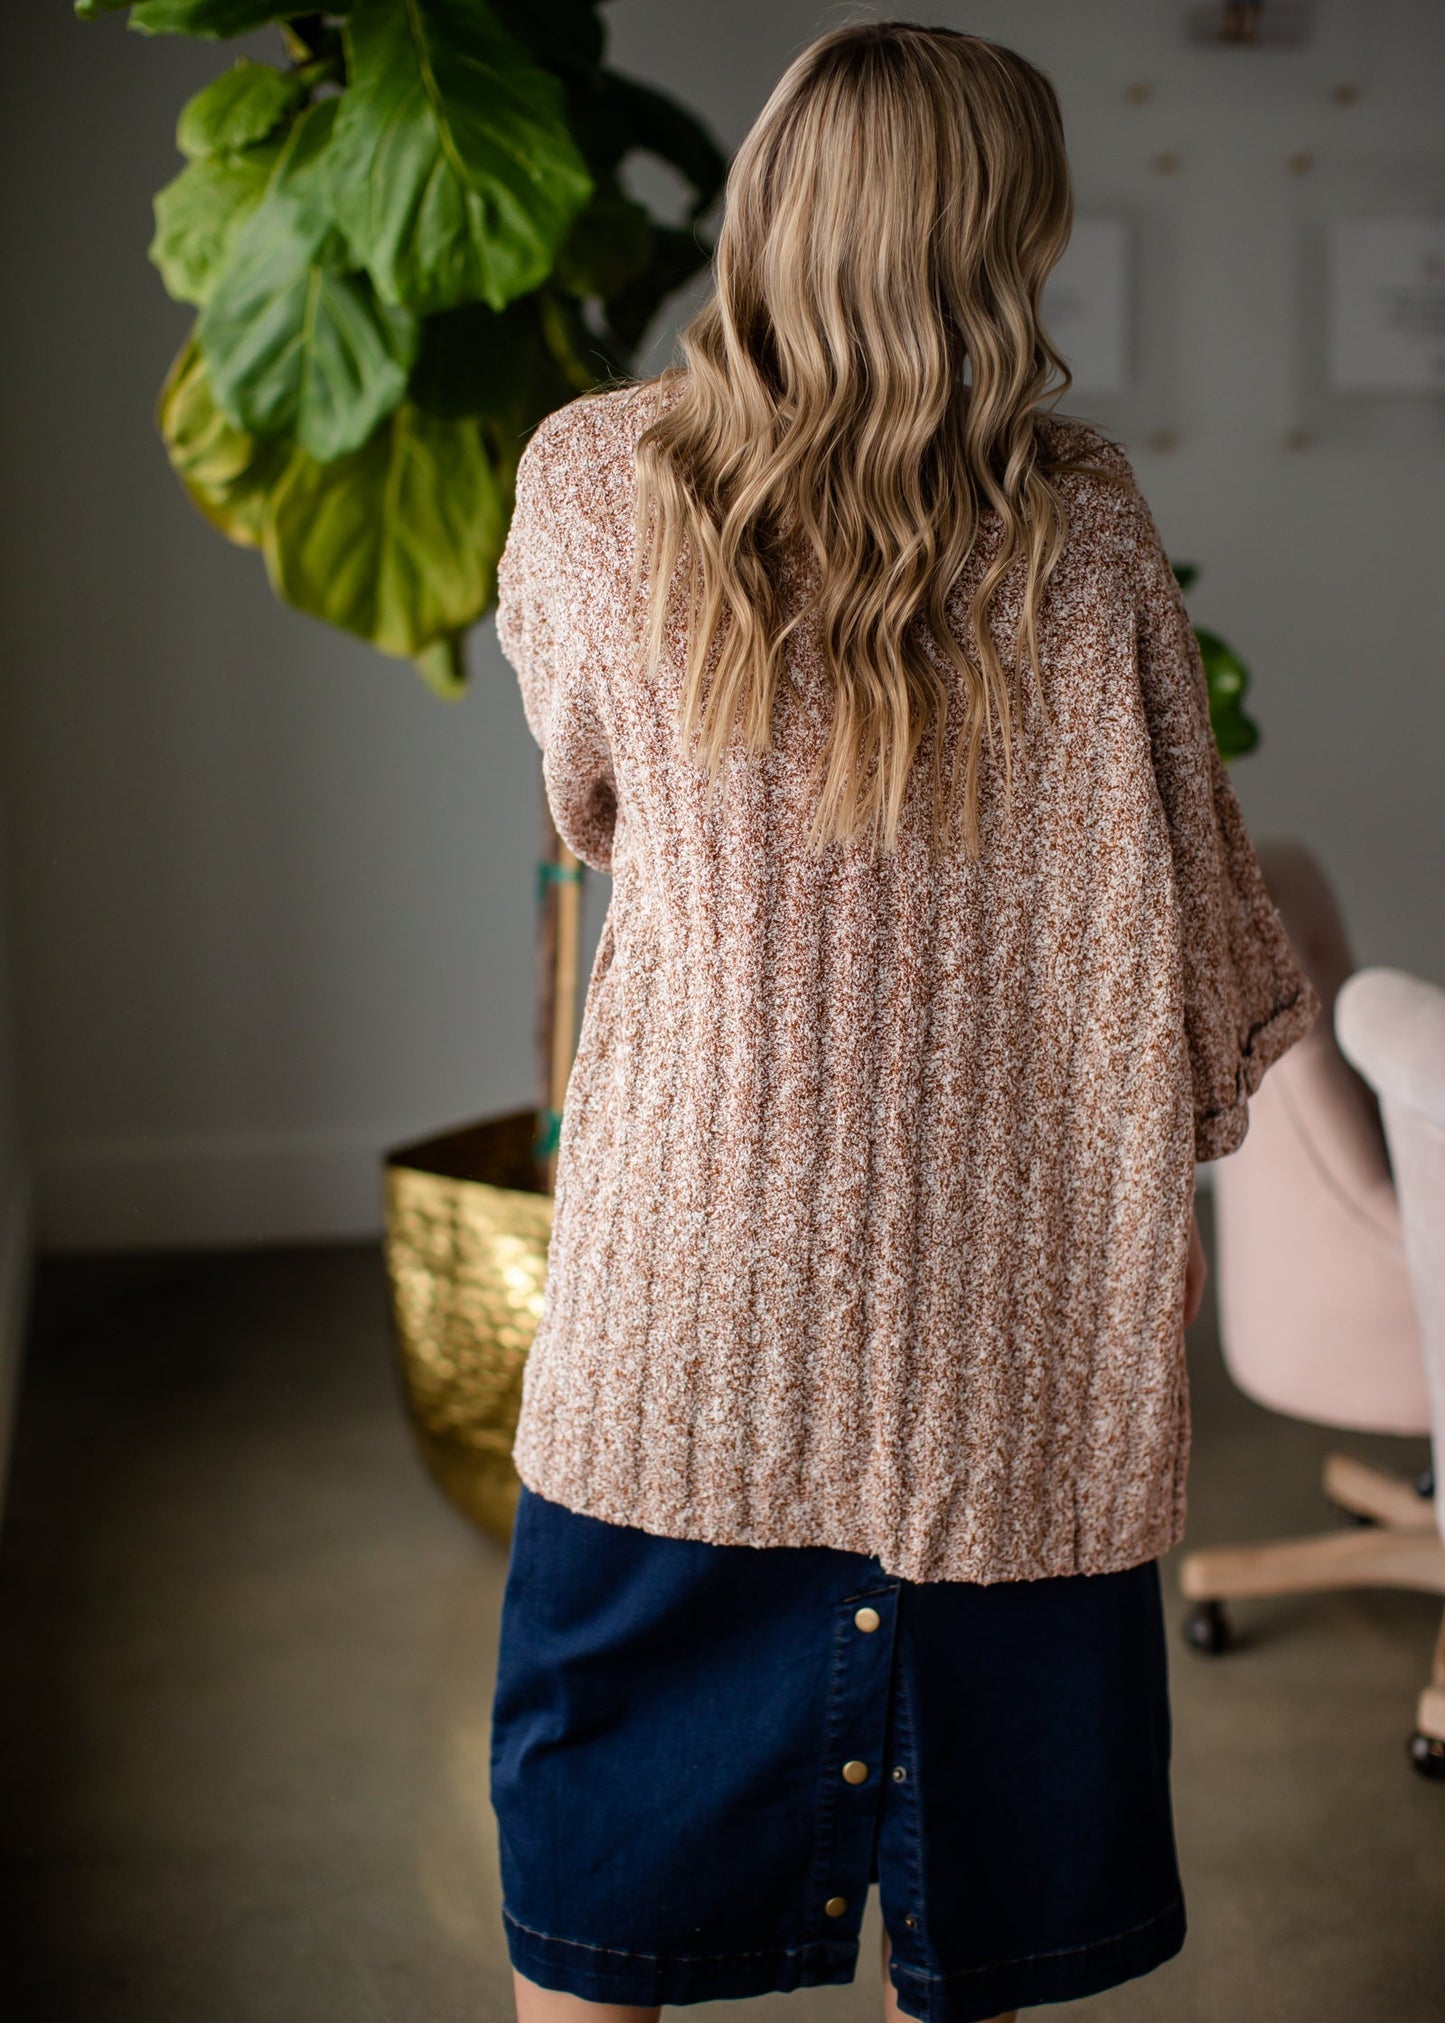 Knit Sweater 3/4 Sleeve Mixed Yarn Cardigan - FINAL SALE Tops By Together